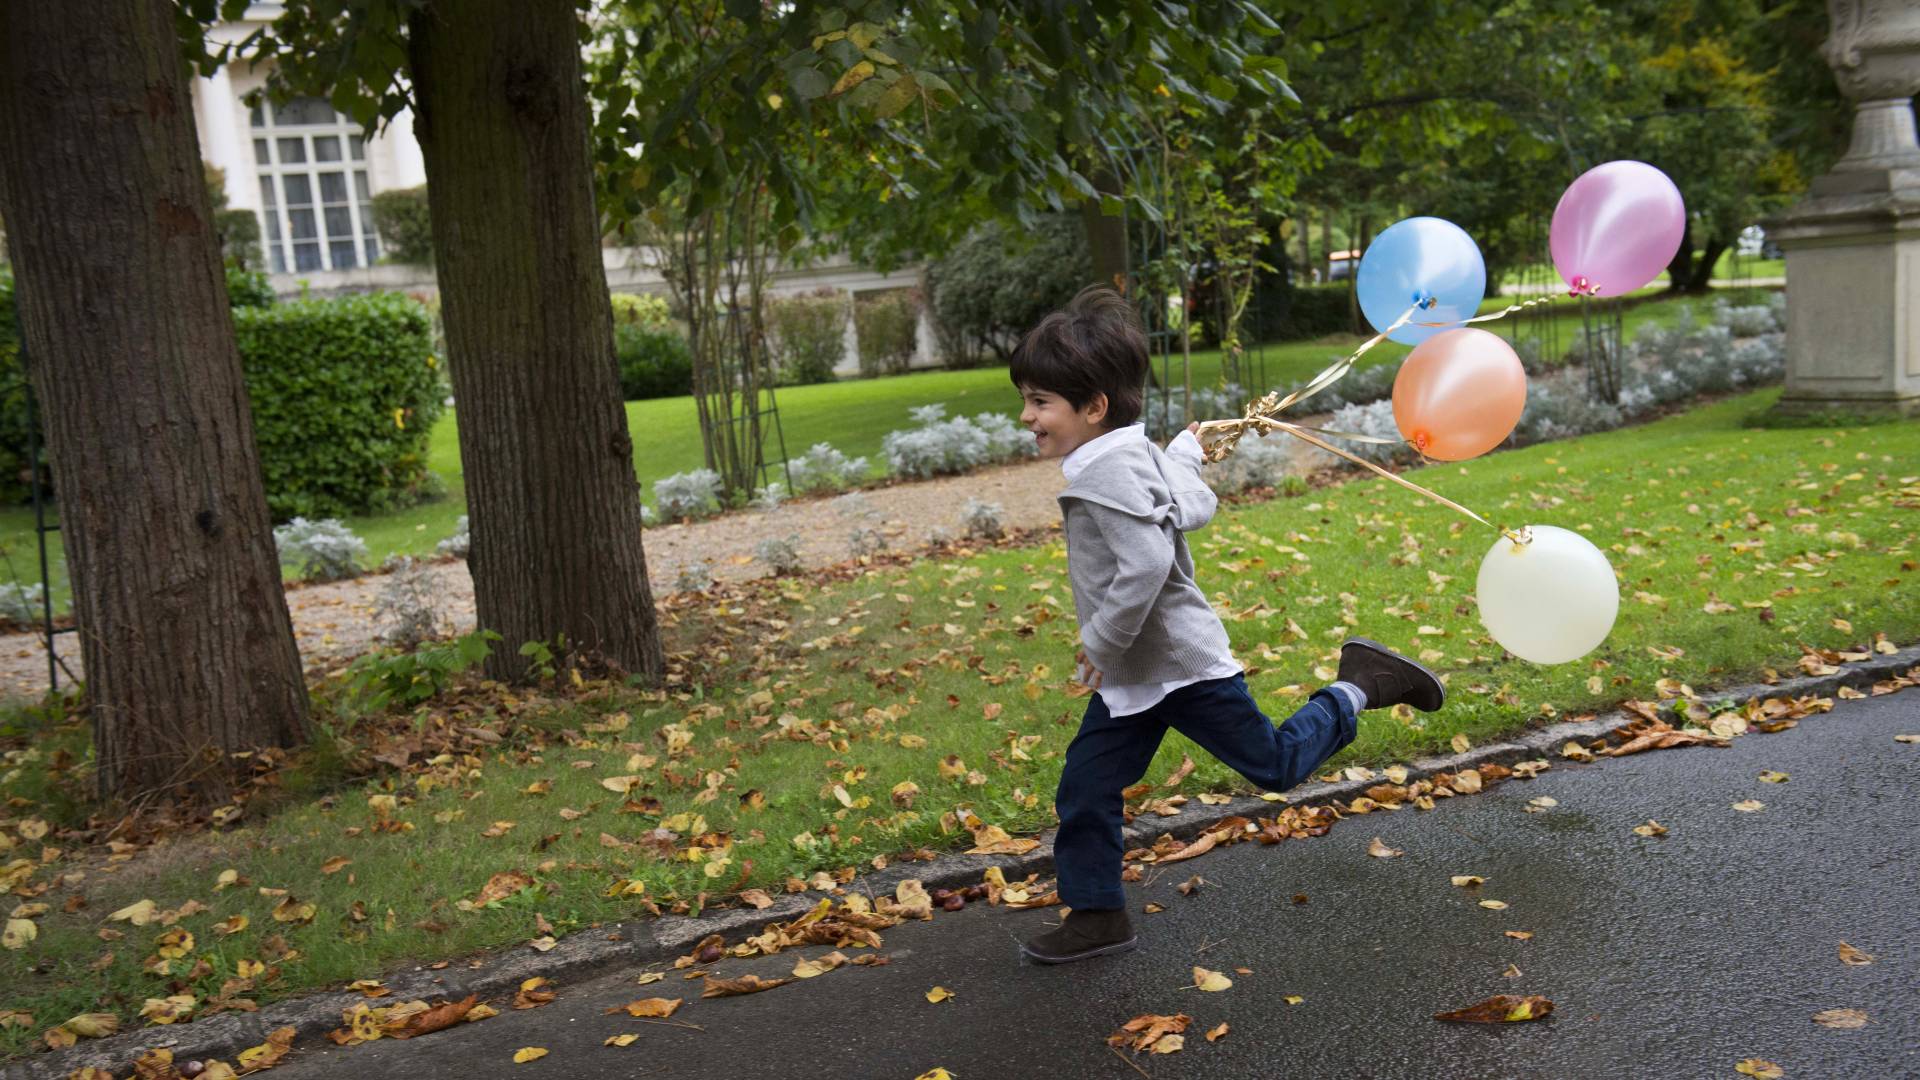 Boy Running with Balloons